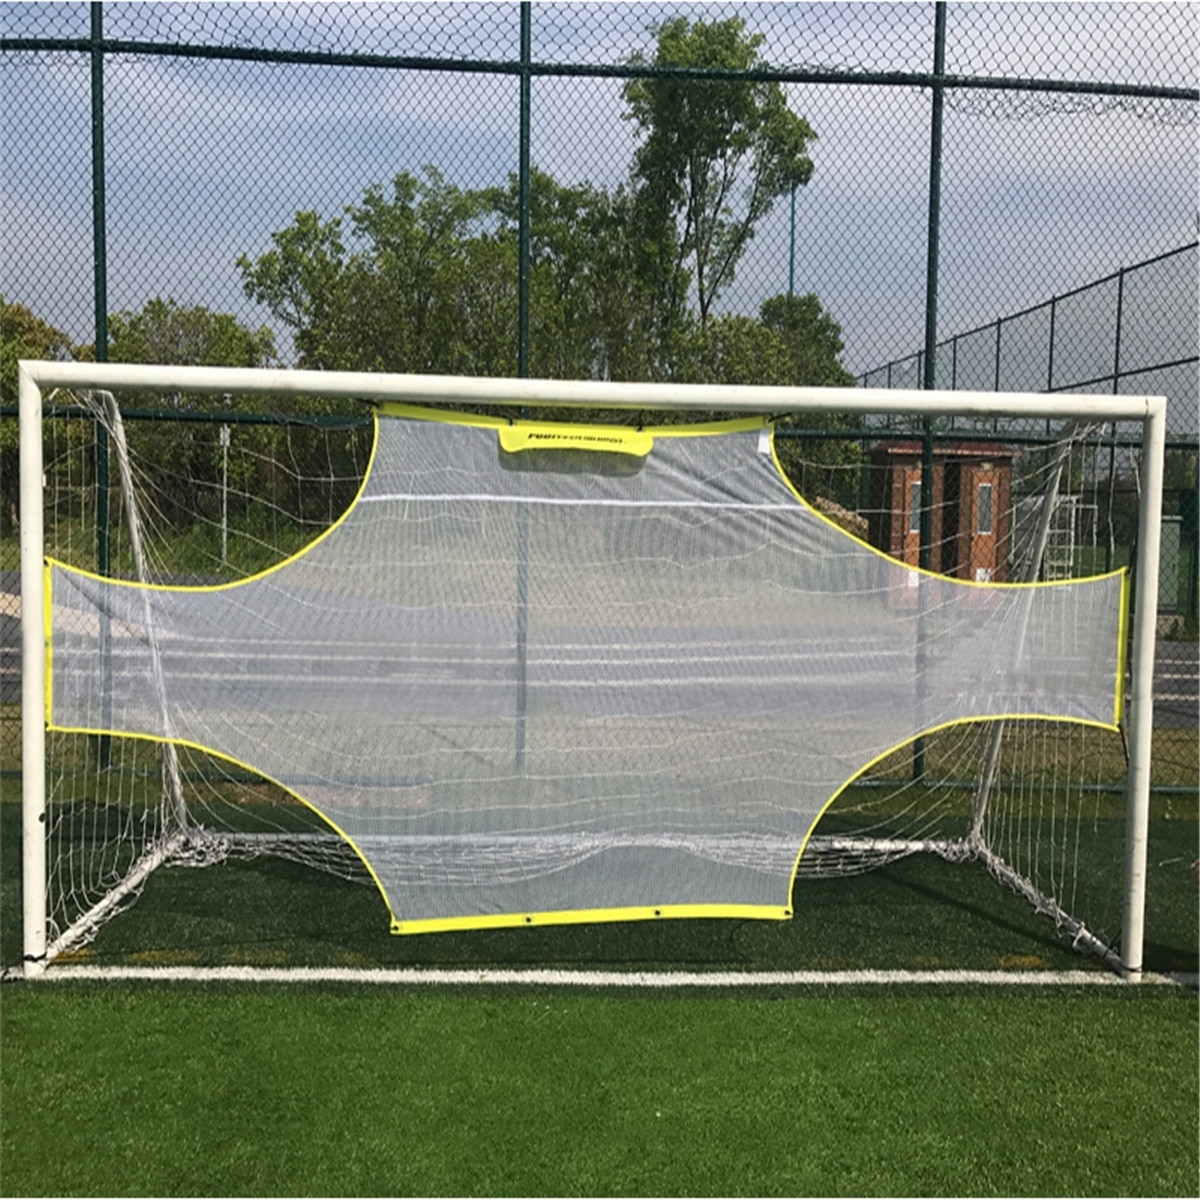 Professional Football Soccer Target Net Goals Training Shooting Practice Aid 